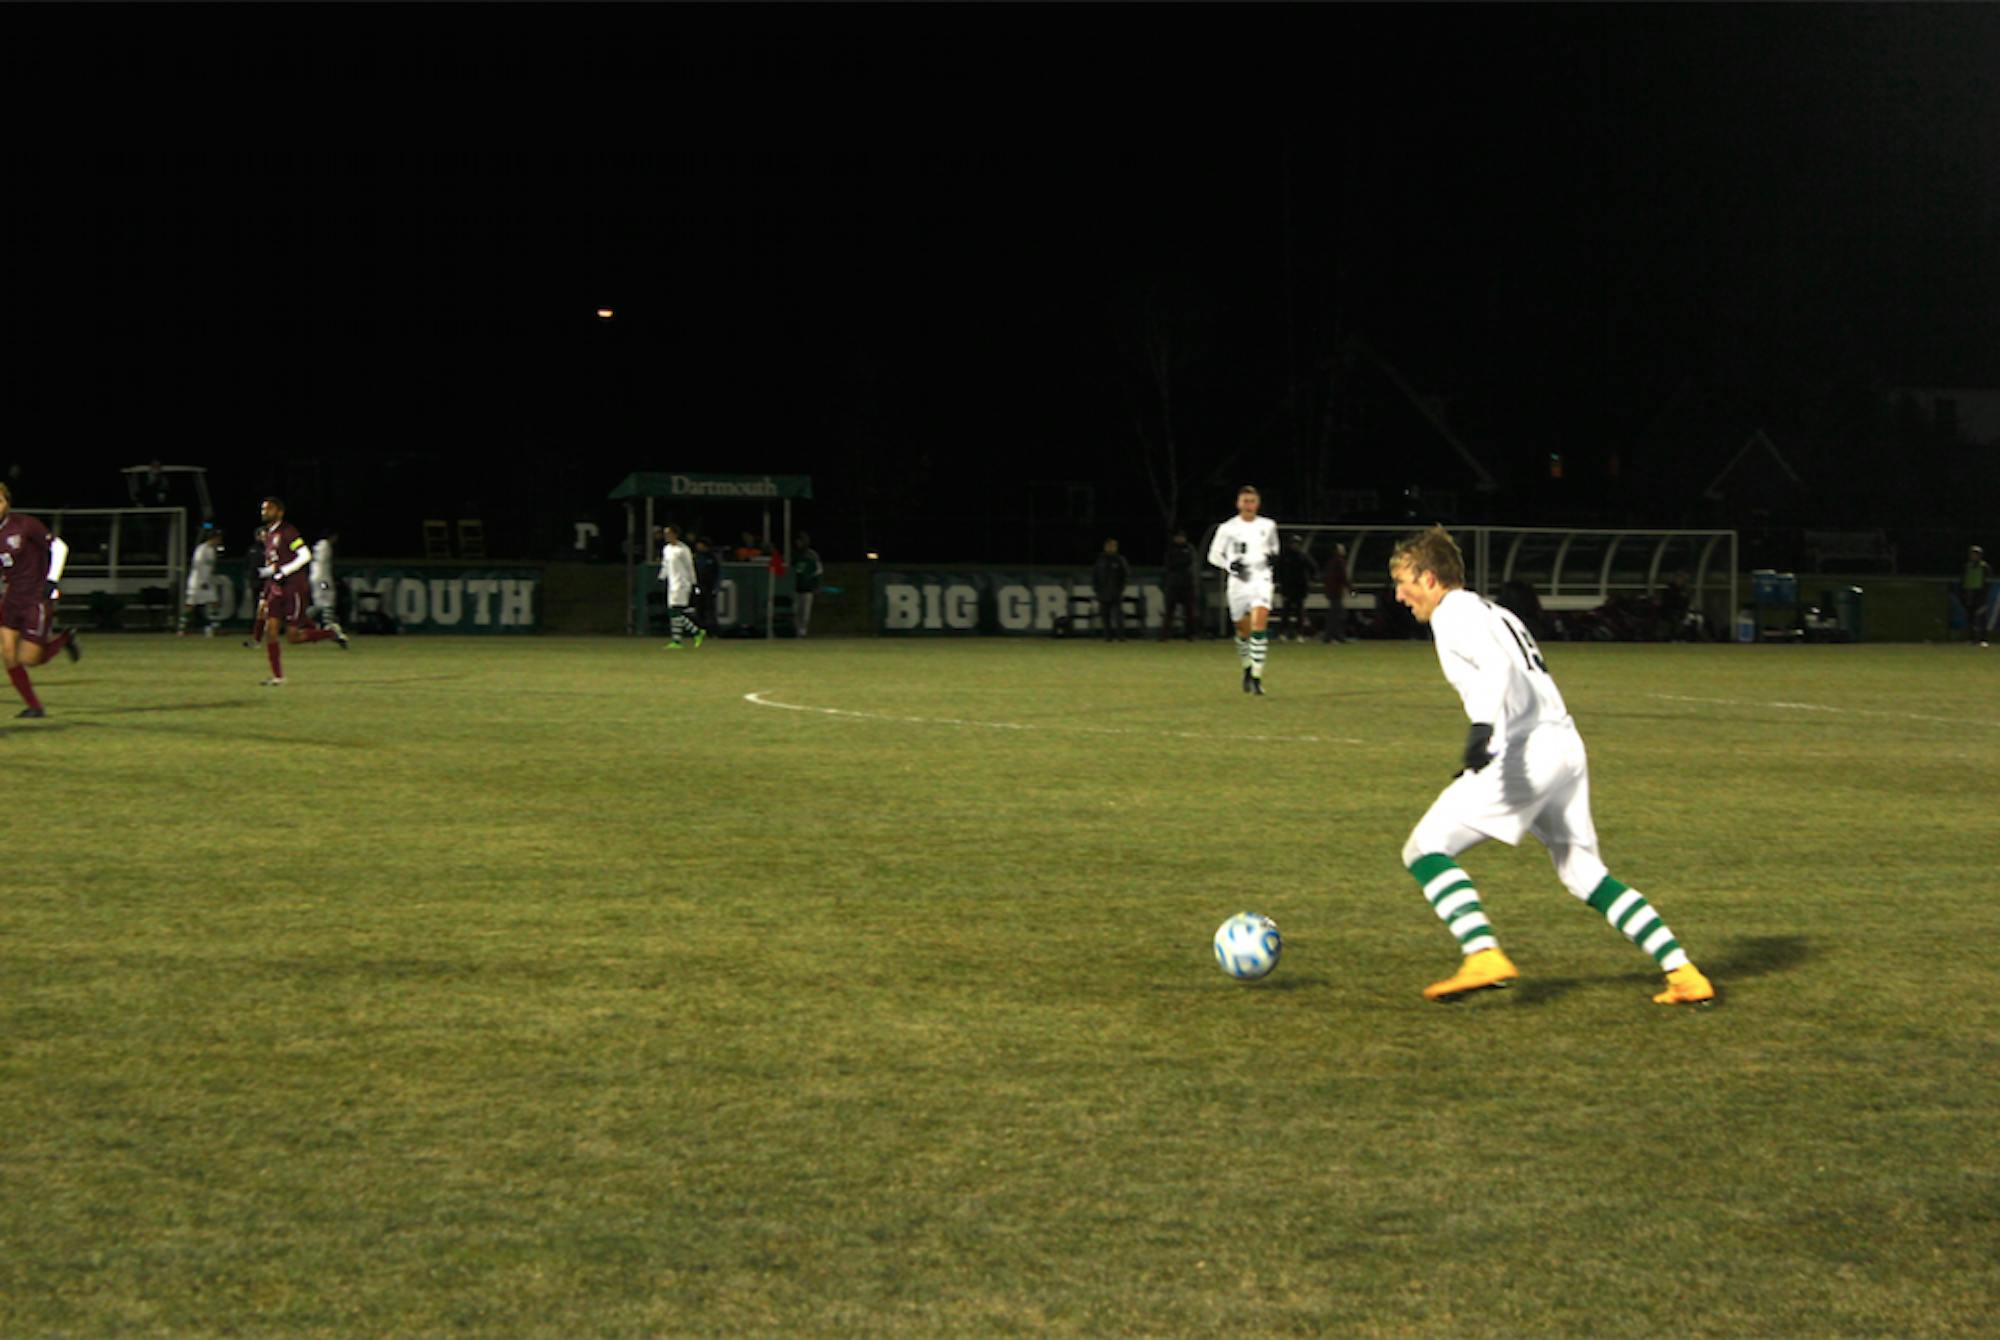 The men's soccer team defeated Fordham 2-1 to move on to the second round of the NCAA Tournament.